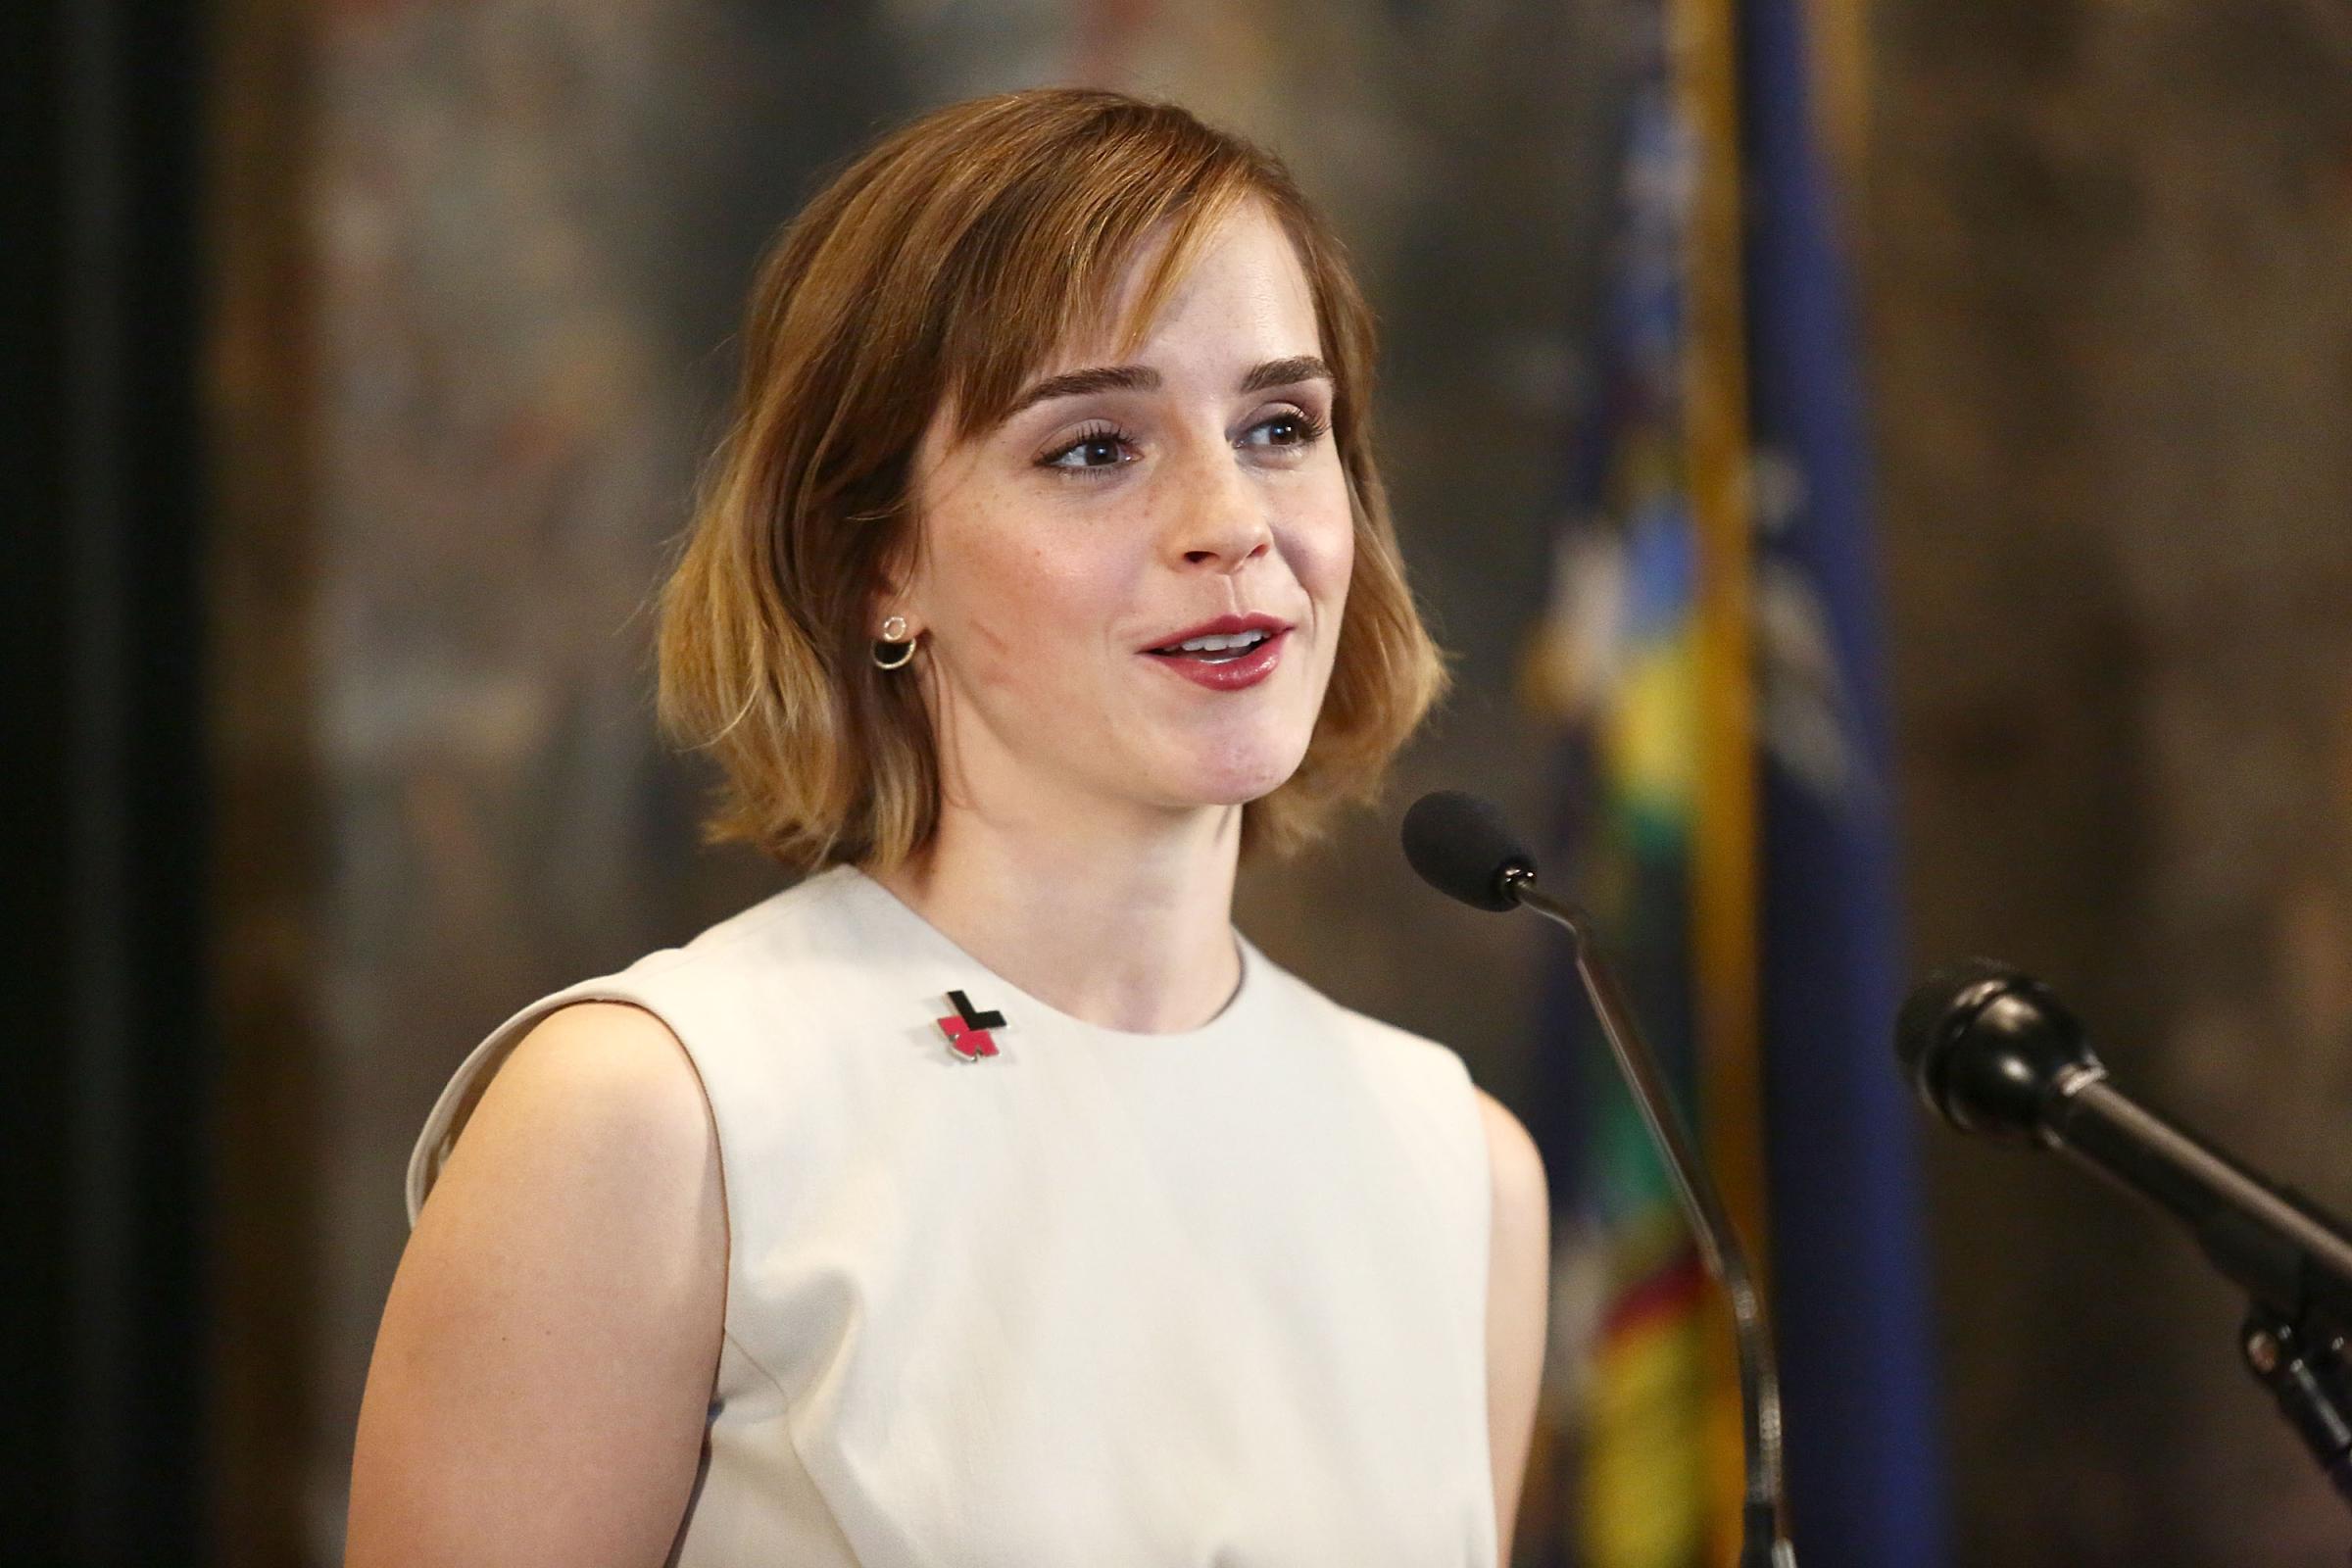 Actress Emma Watson speaks during The Empire State Building lighting In HeForShe Magenta For International Women's Day at The Empire State Building on March 8, 2016 in New York City.